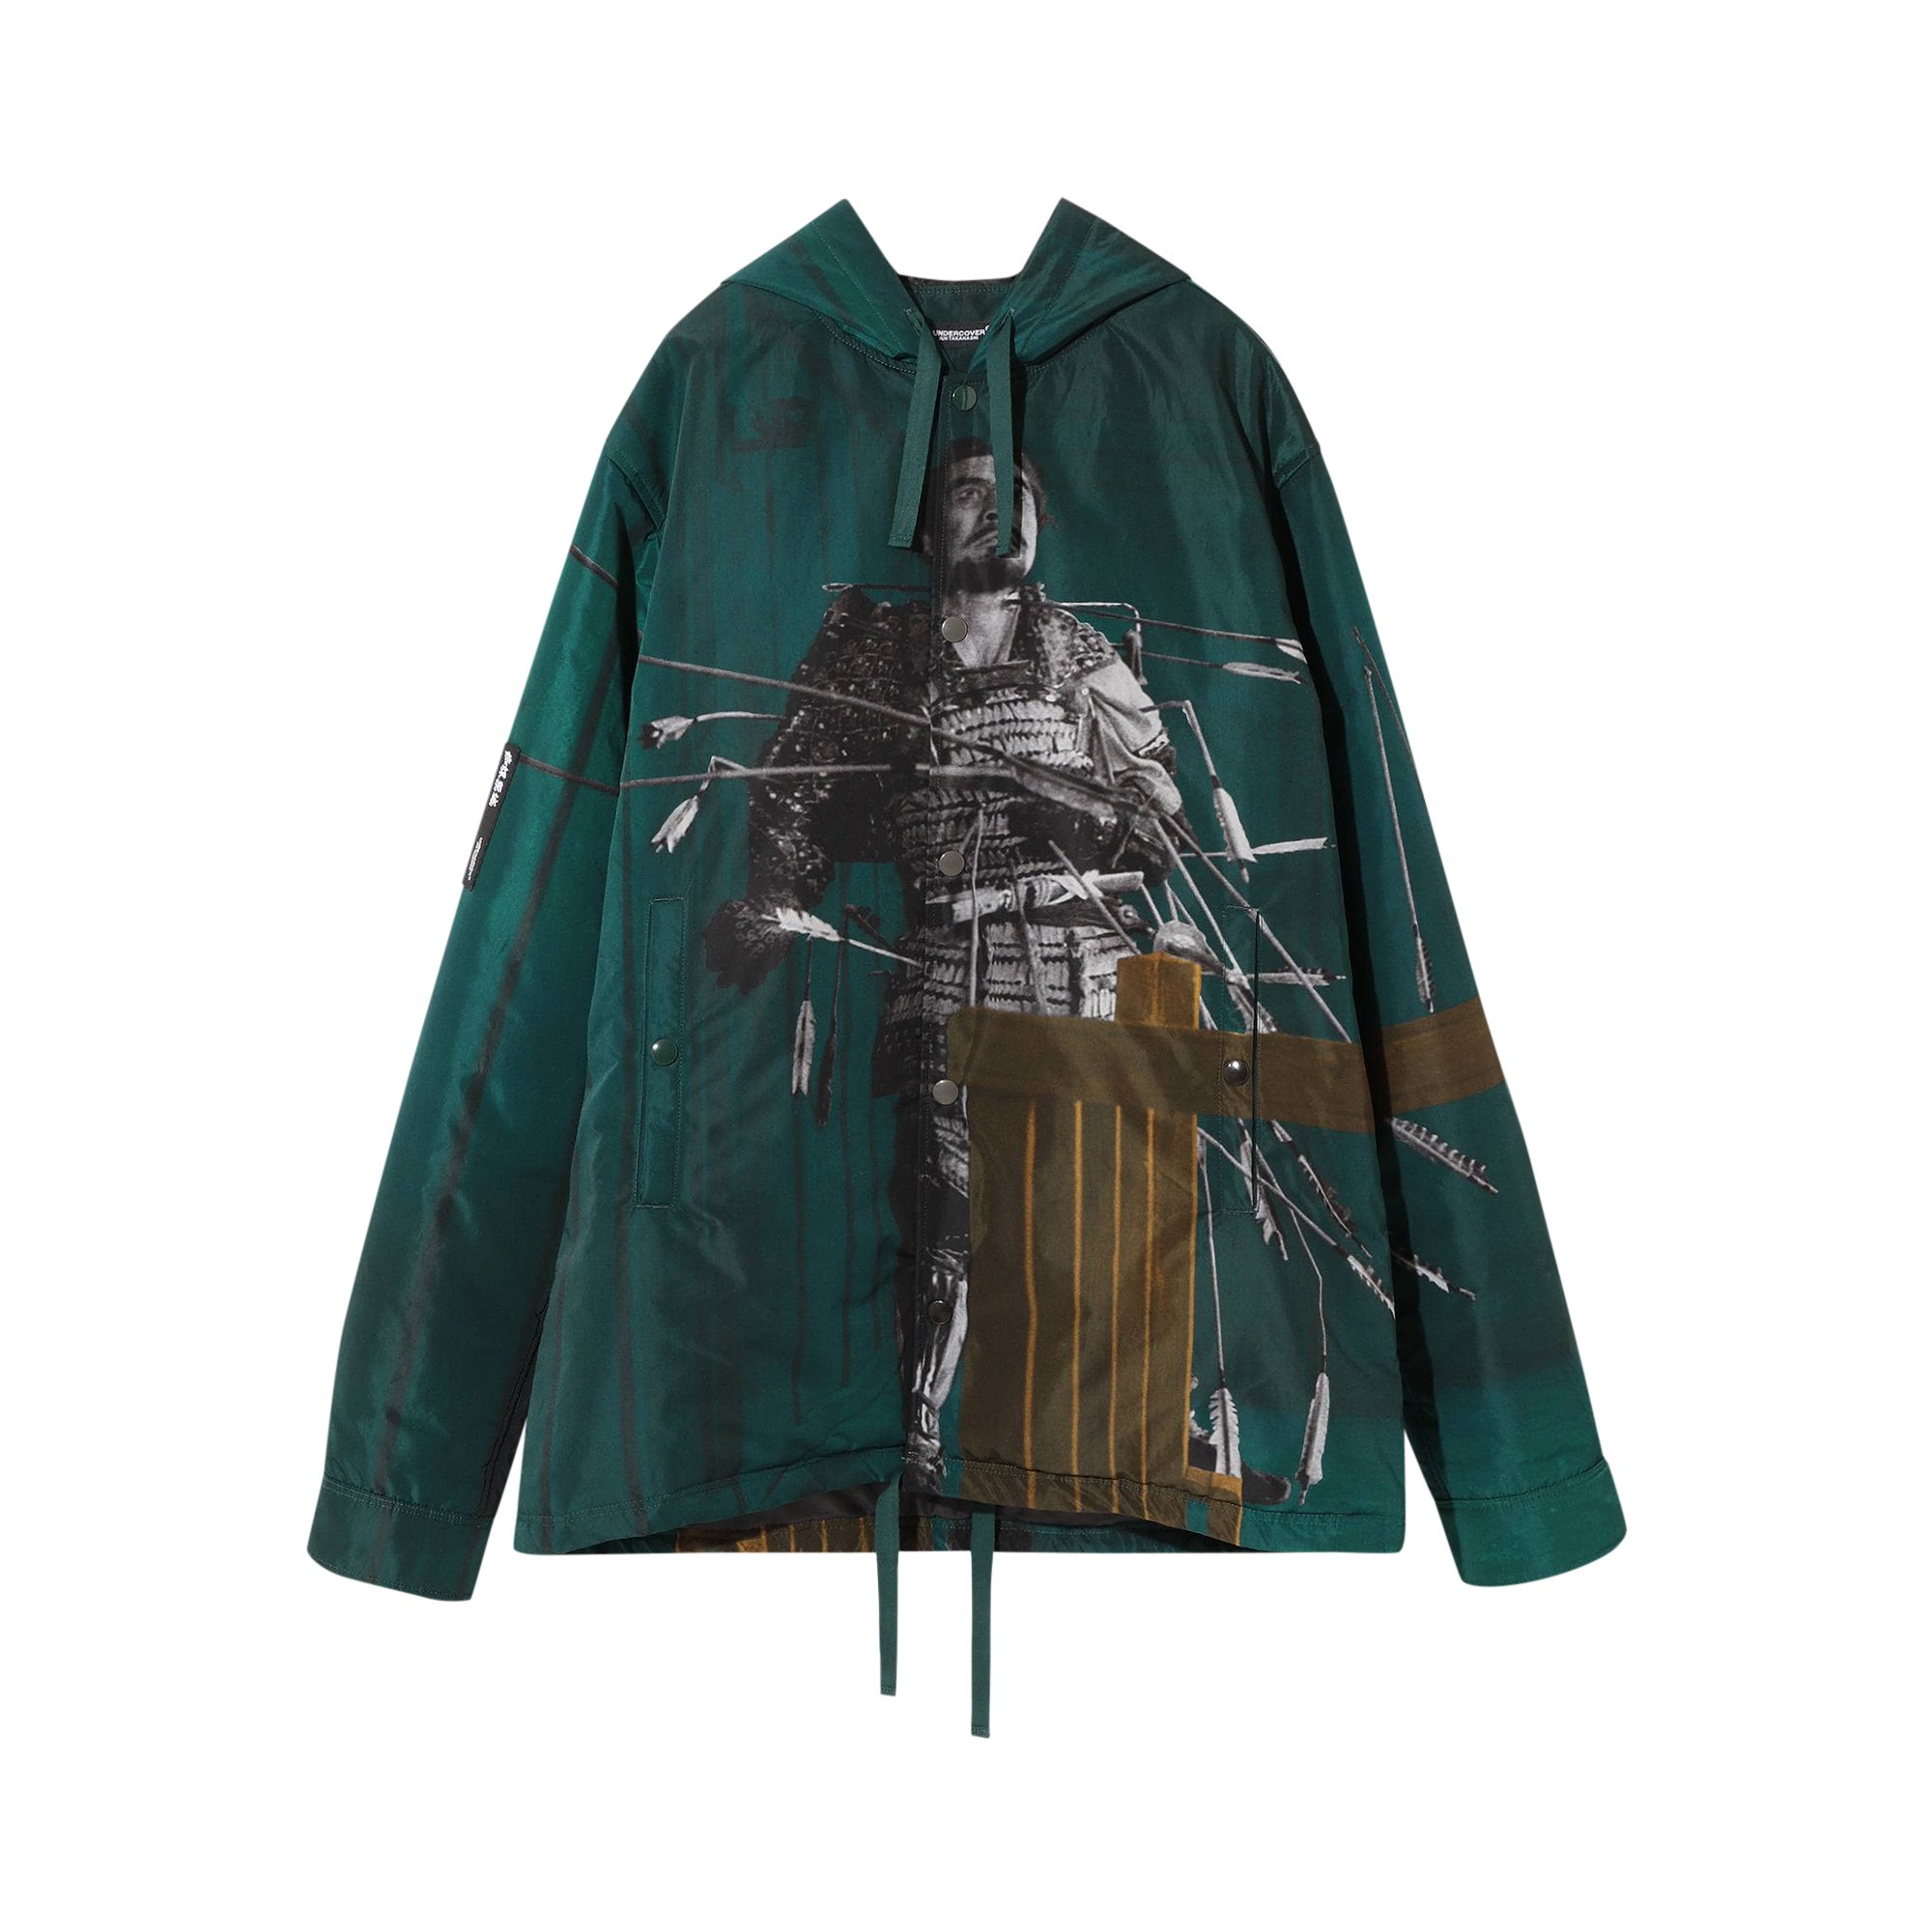 Buy Undercover Throne of Blood Parka 'Green' - UCZ4208 1 GREE | GOAT